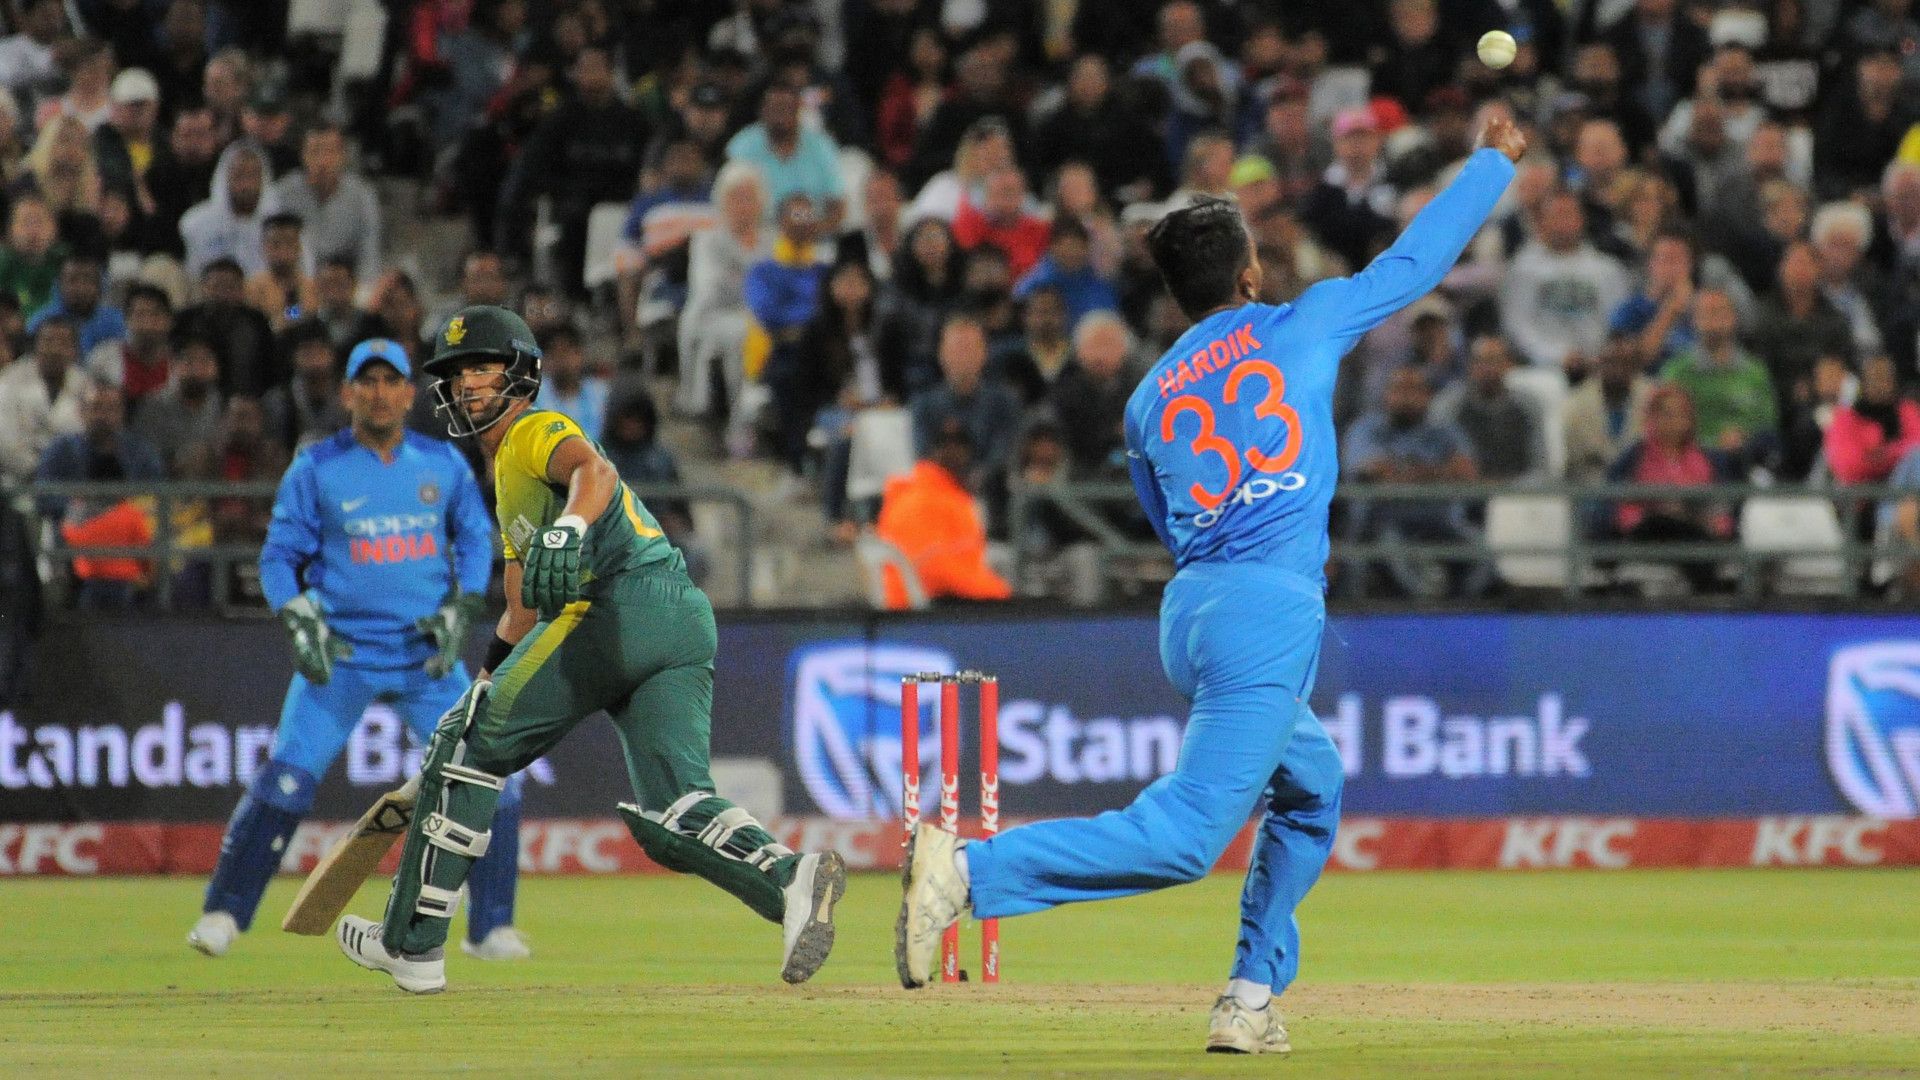 India vs South Africa live stream how to watch T20 cricket series